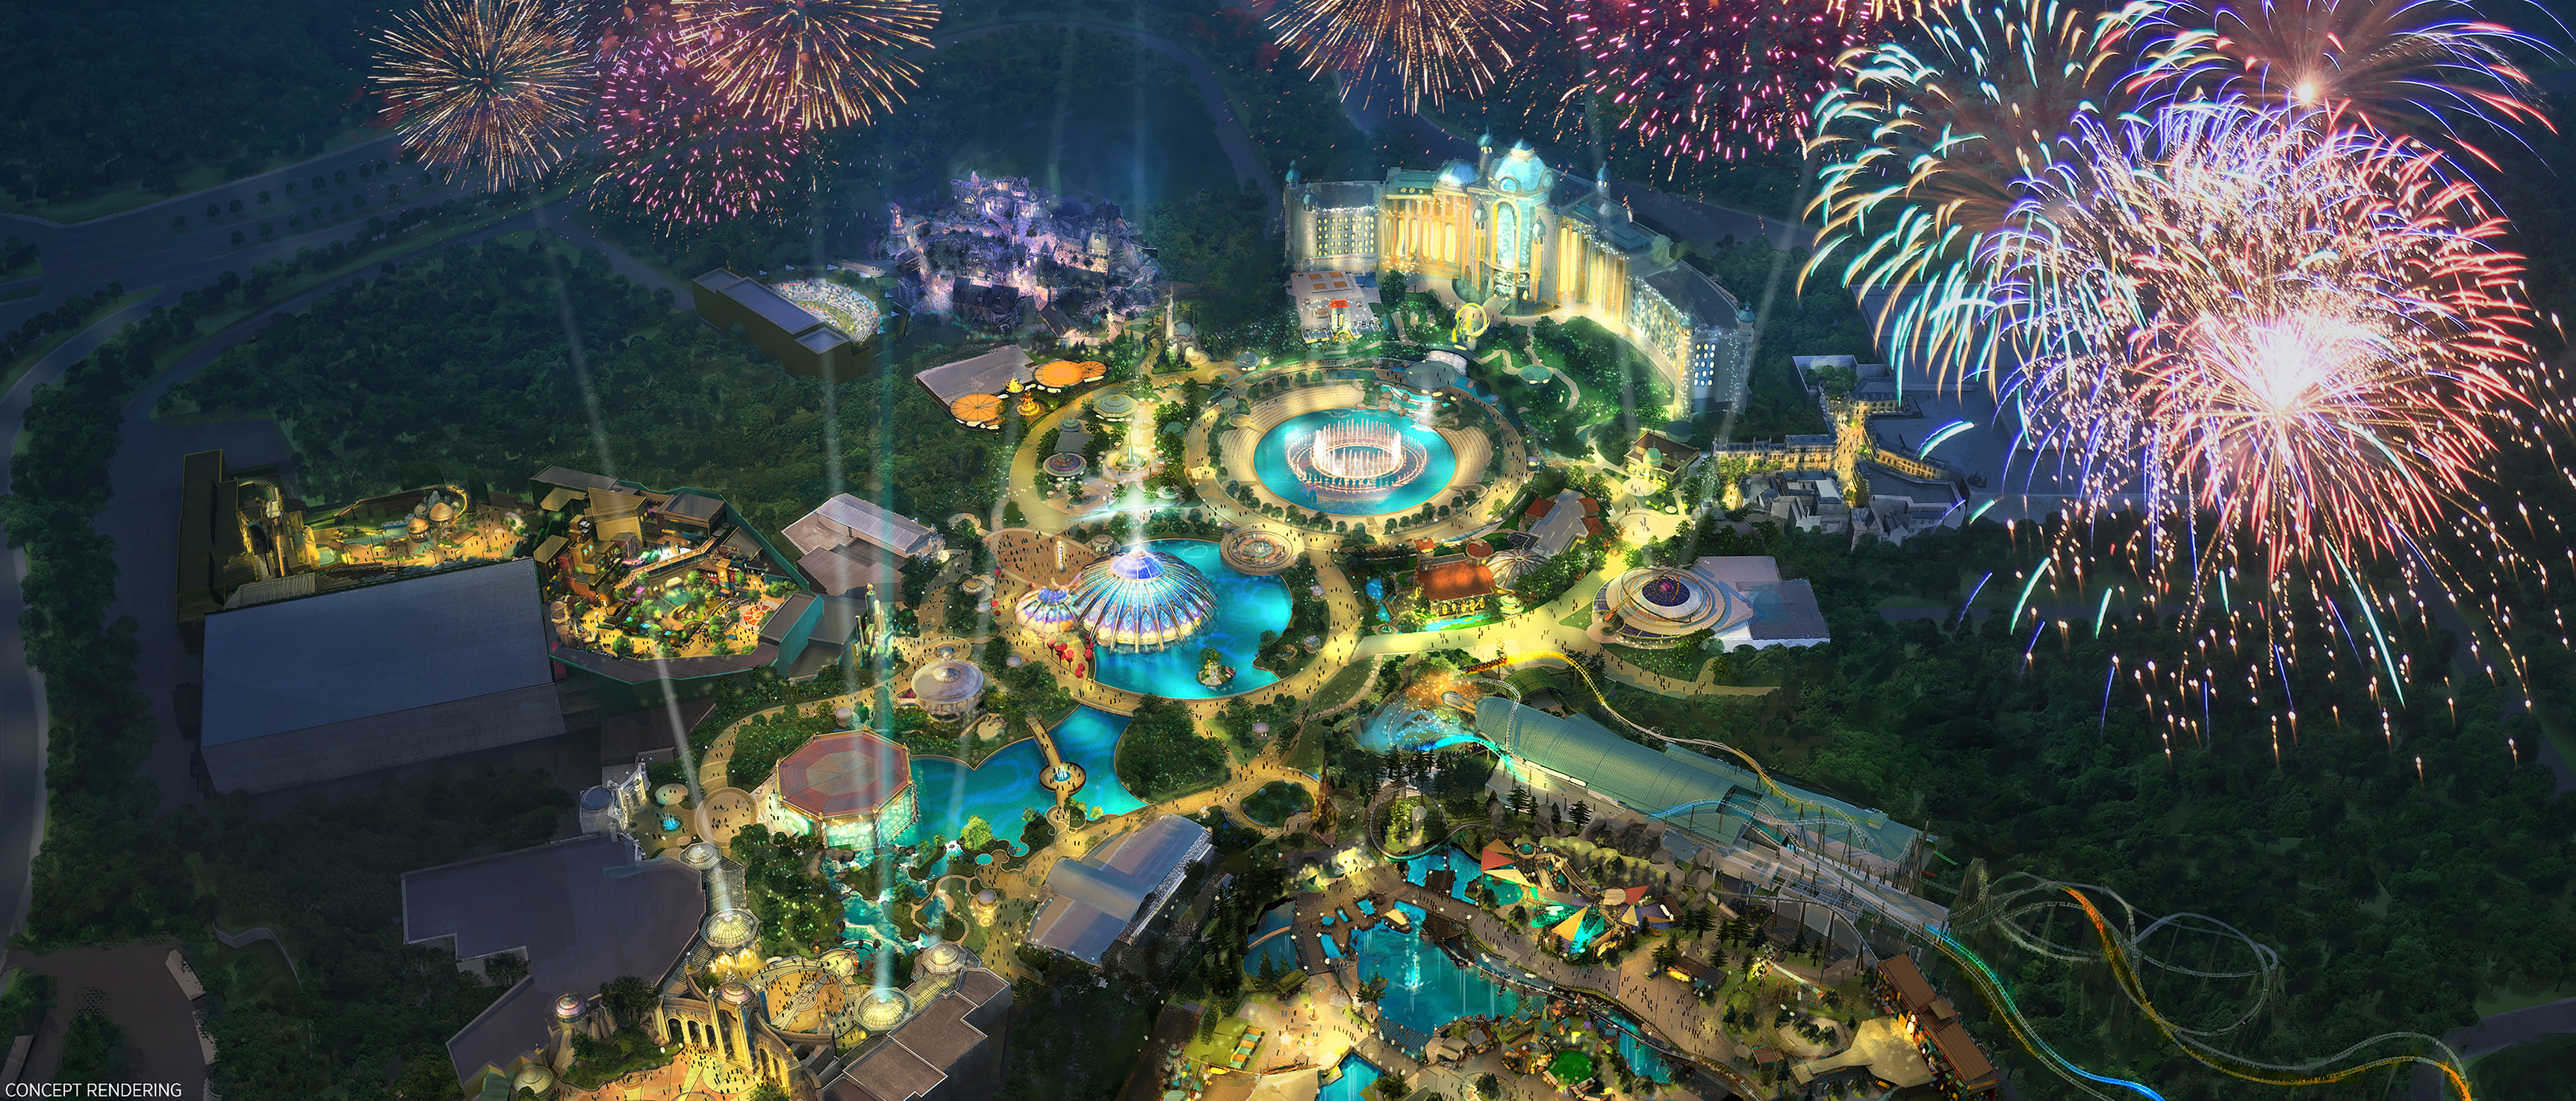 Concept art for Universal Orlando’s Epic Universe shows a glittering golden landscape at night. Absent are any identifiable intellectual properties.